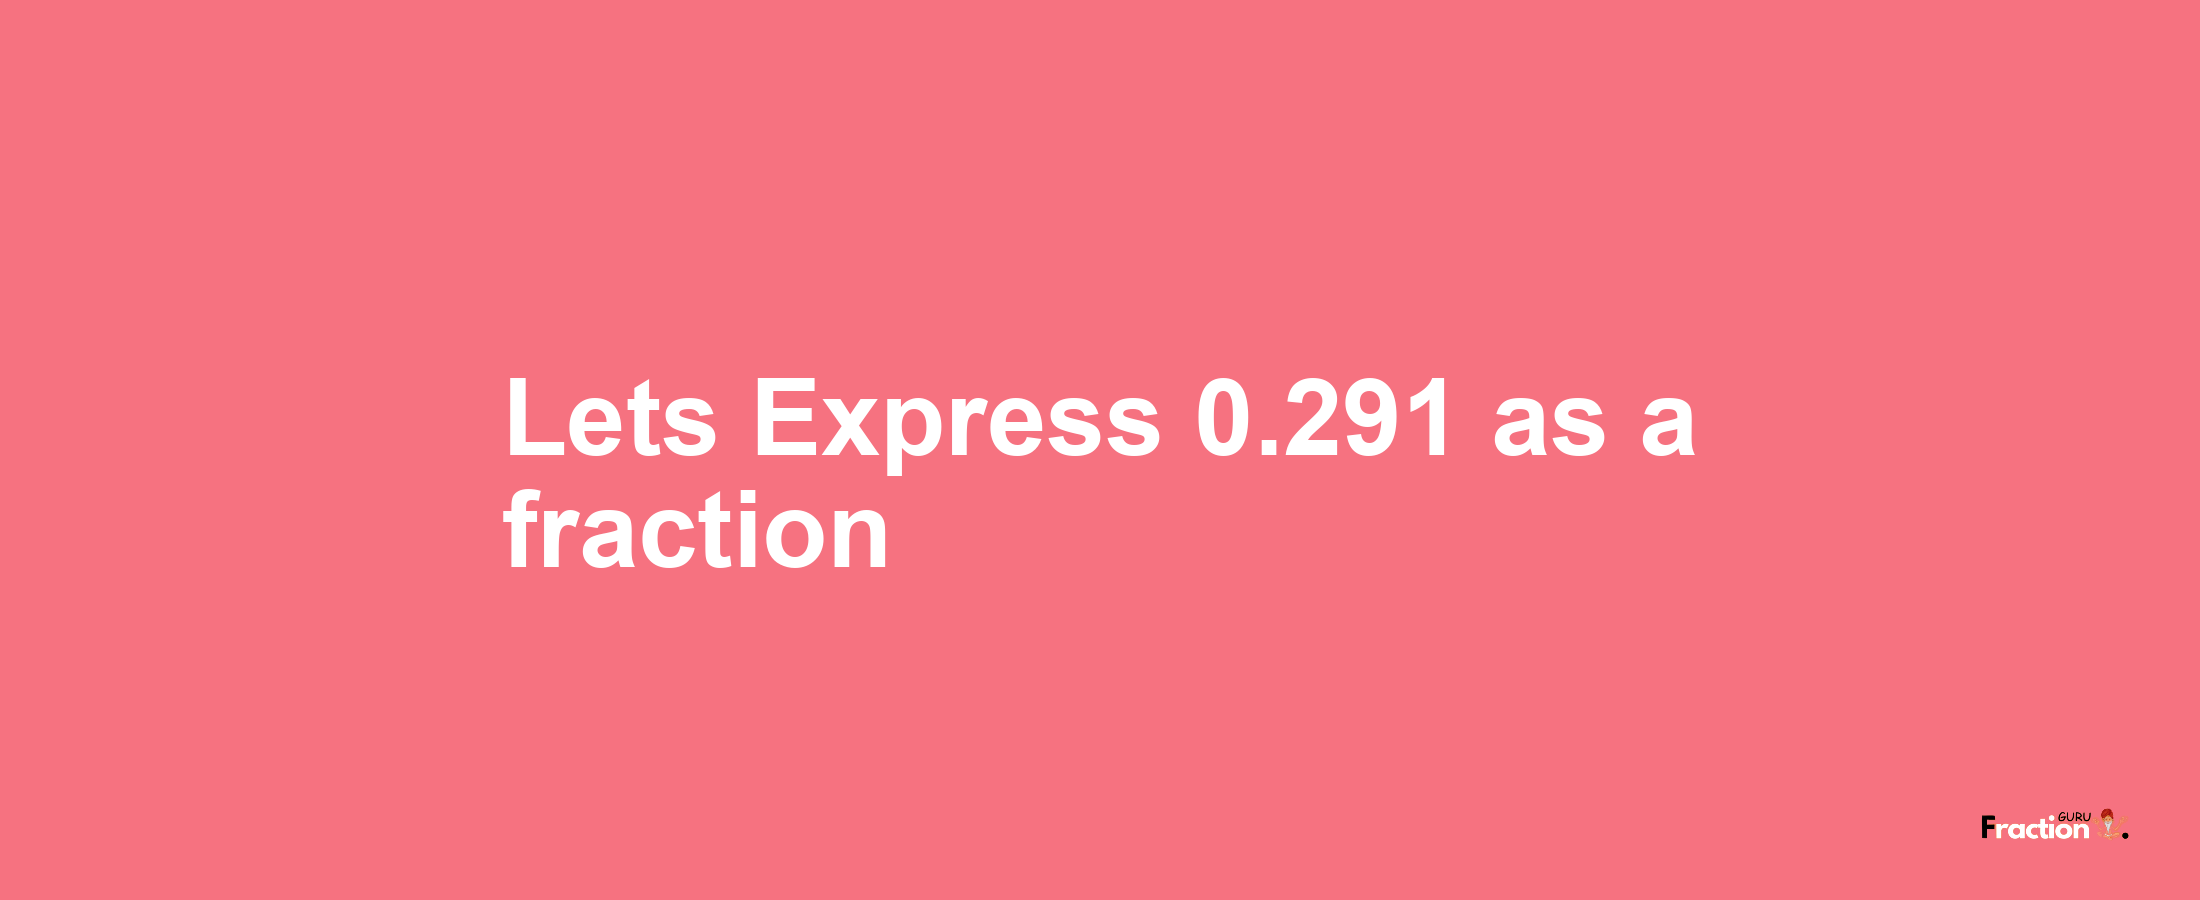 Lets Express 0.291 as afraction